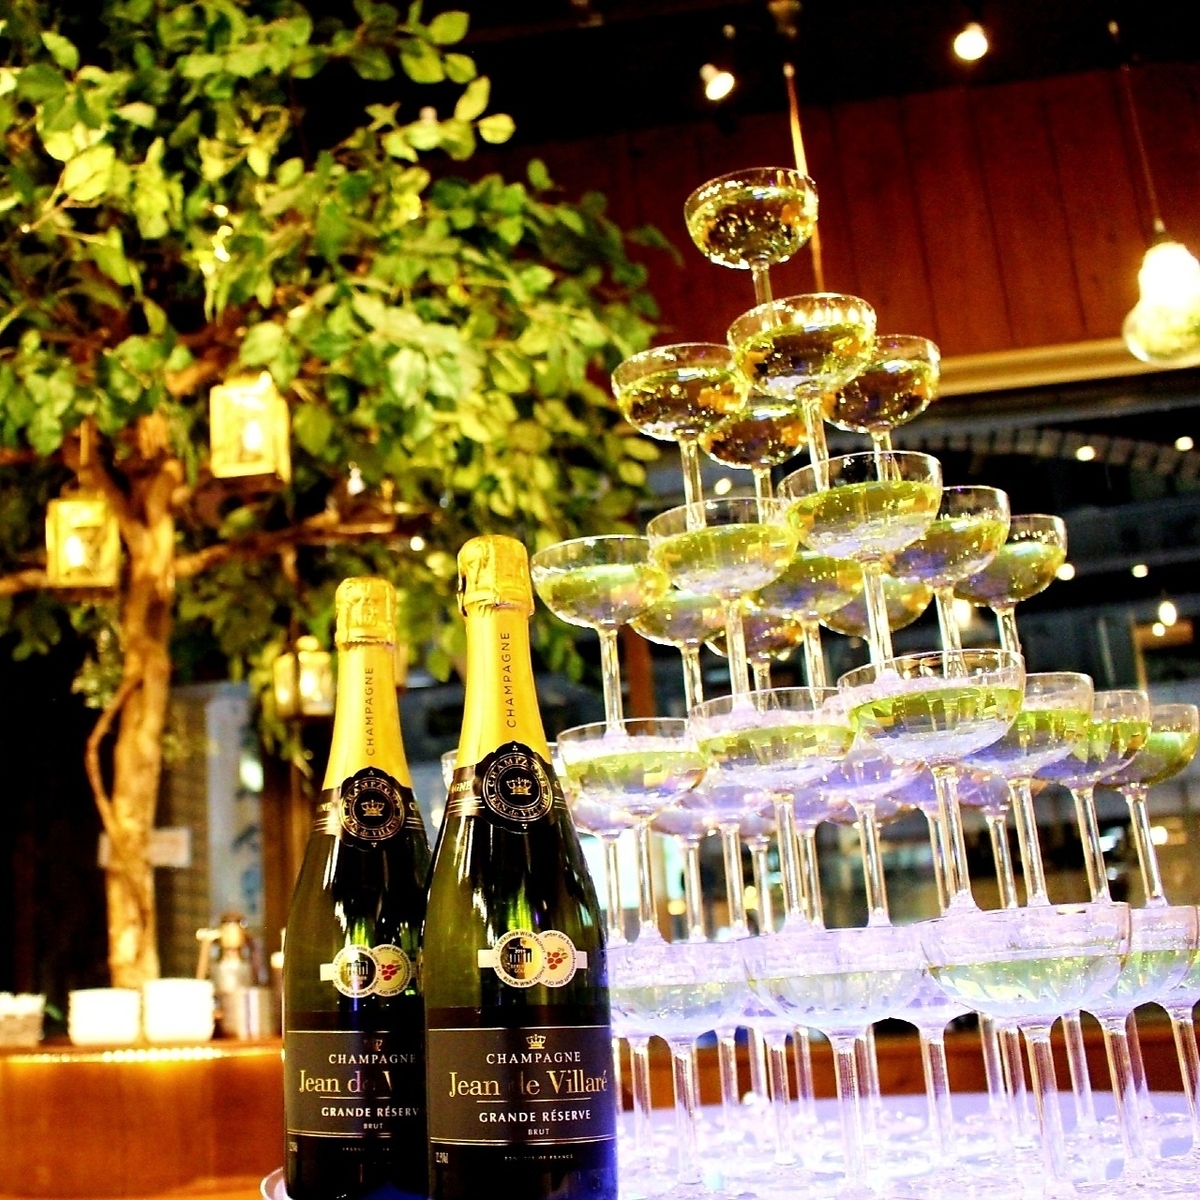 Champagne Tower Champagne Tower